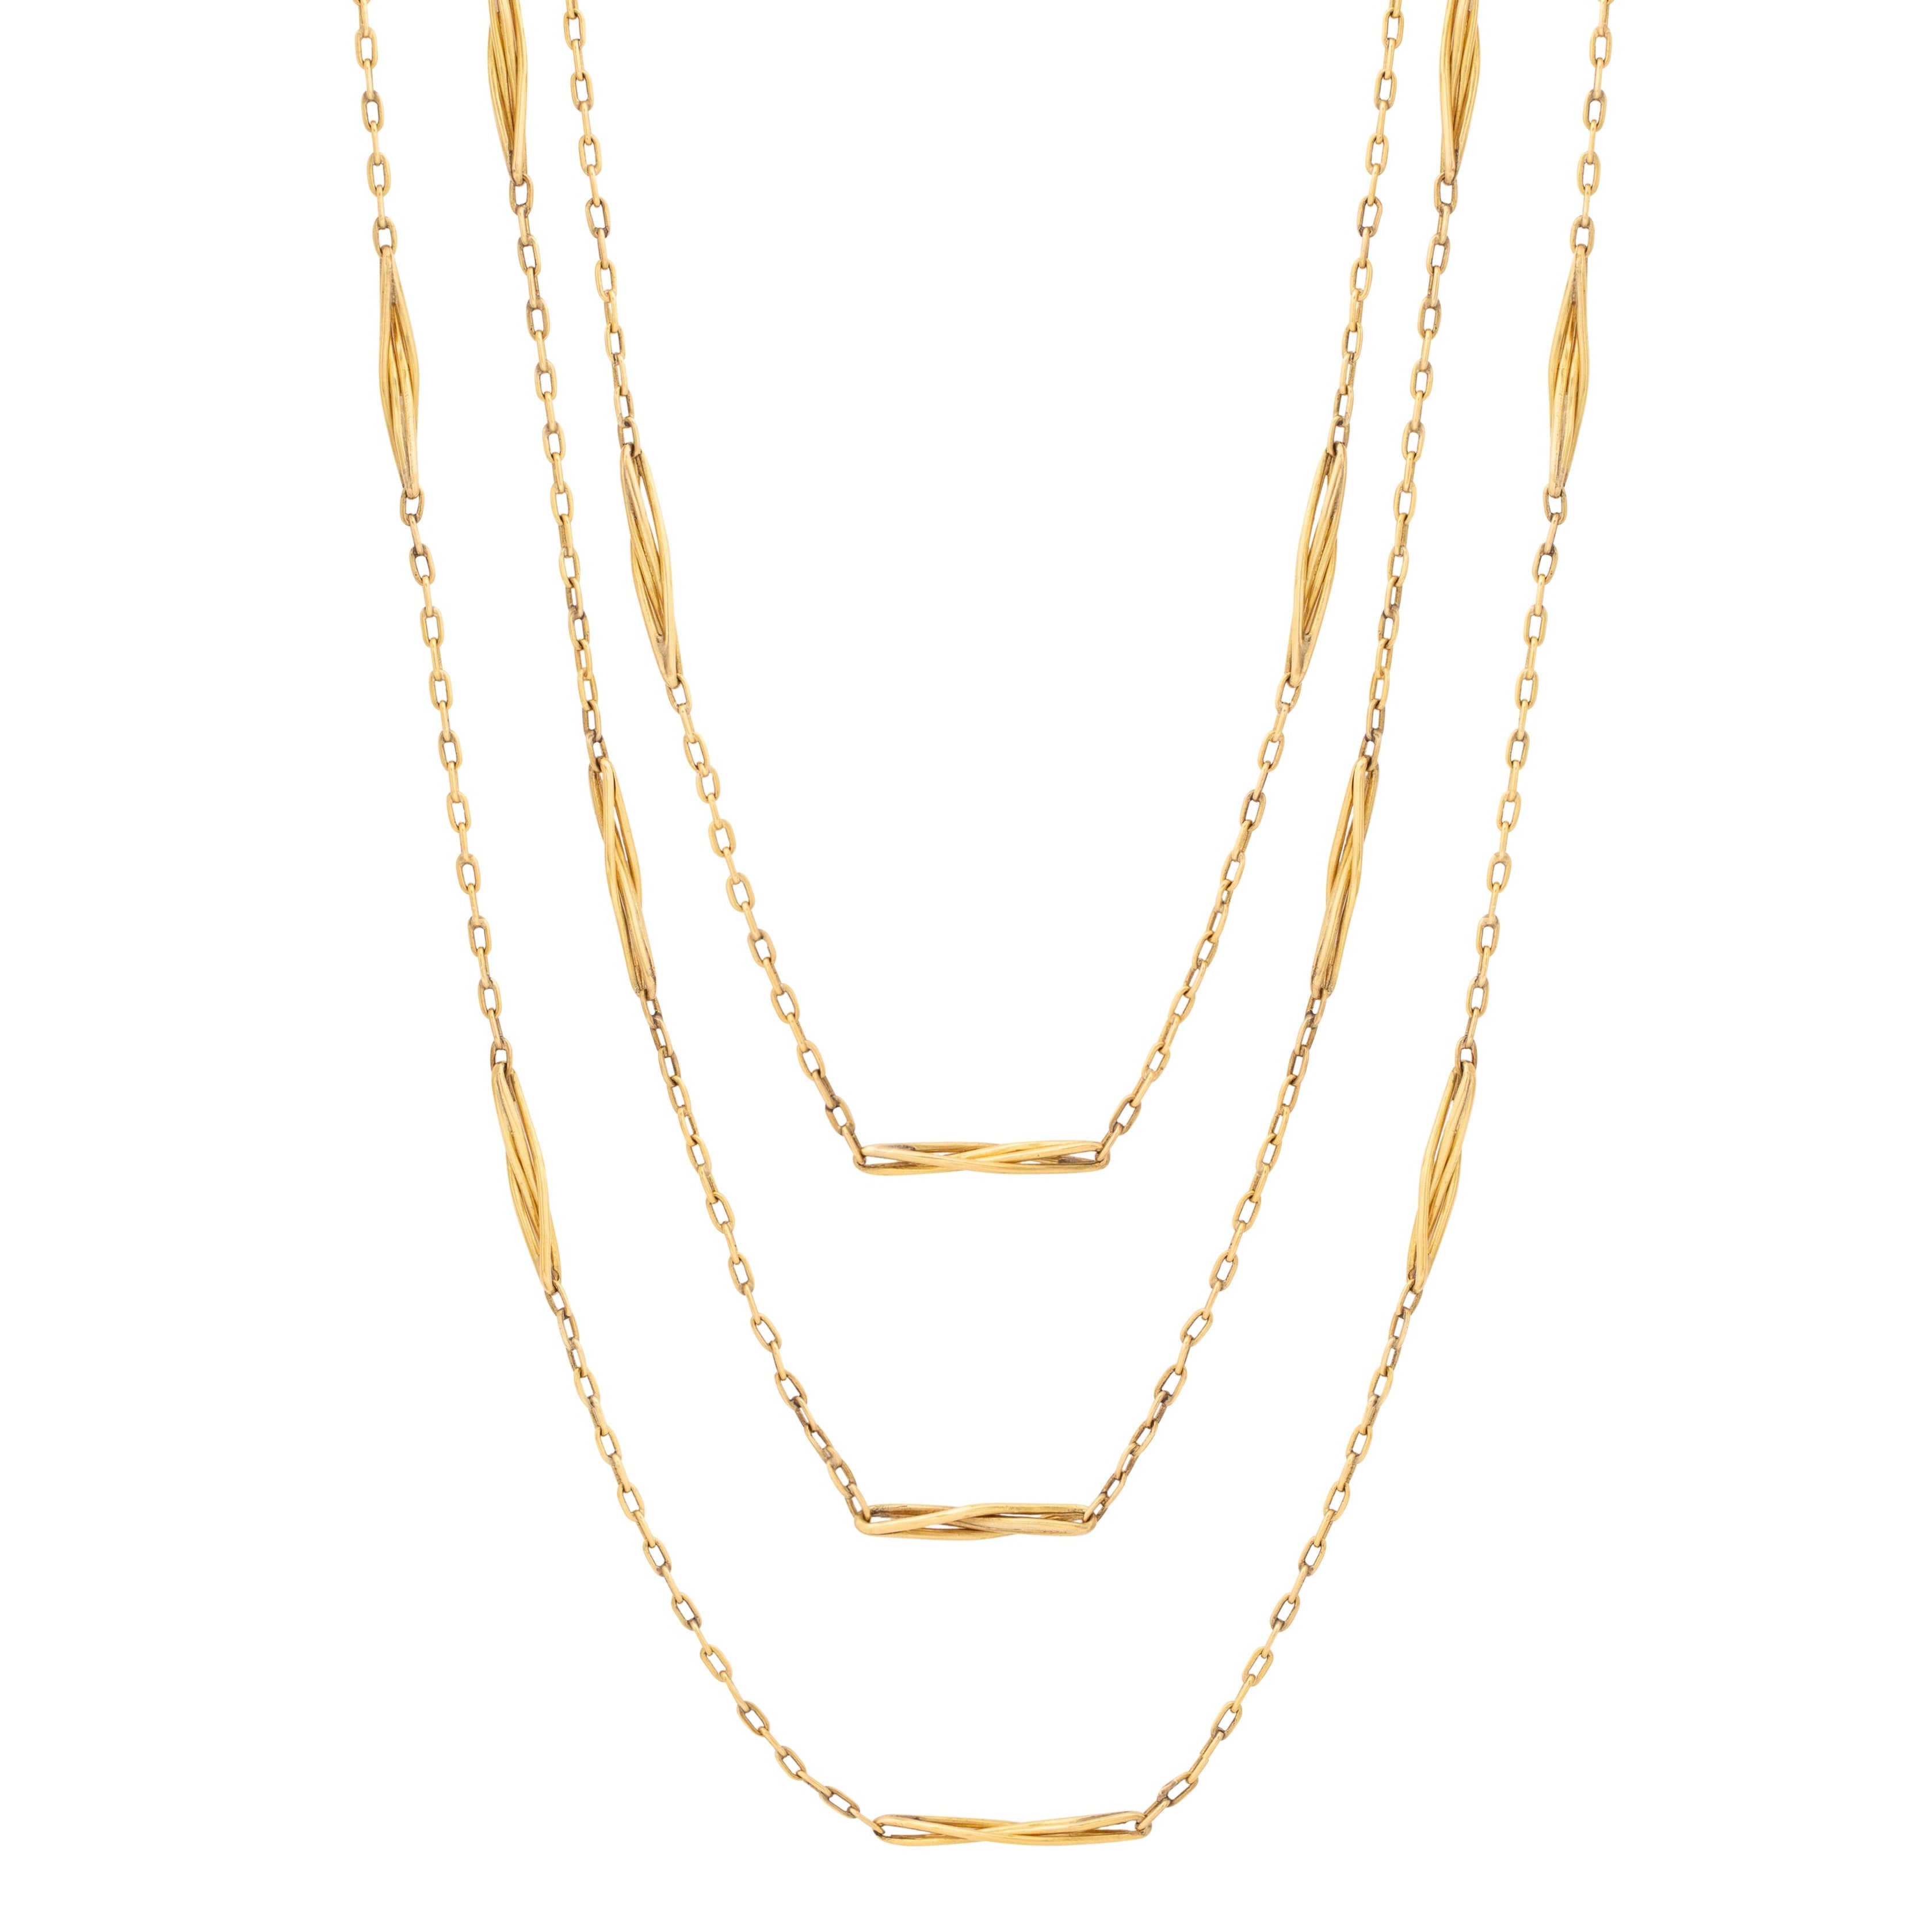 Fancy Link 62" 14k Gold Extra Long Chain Necklace